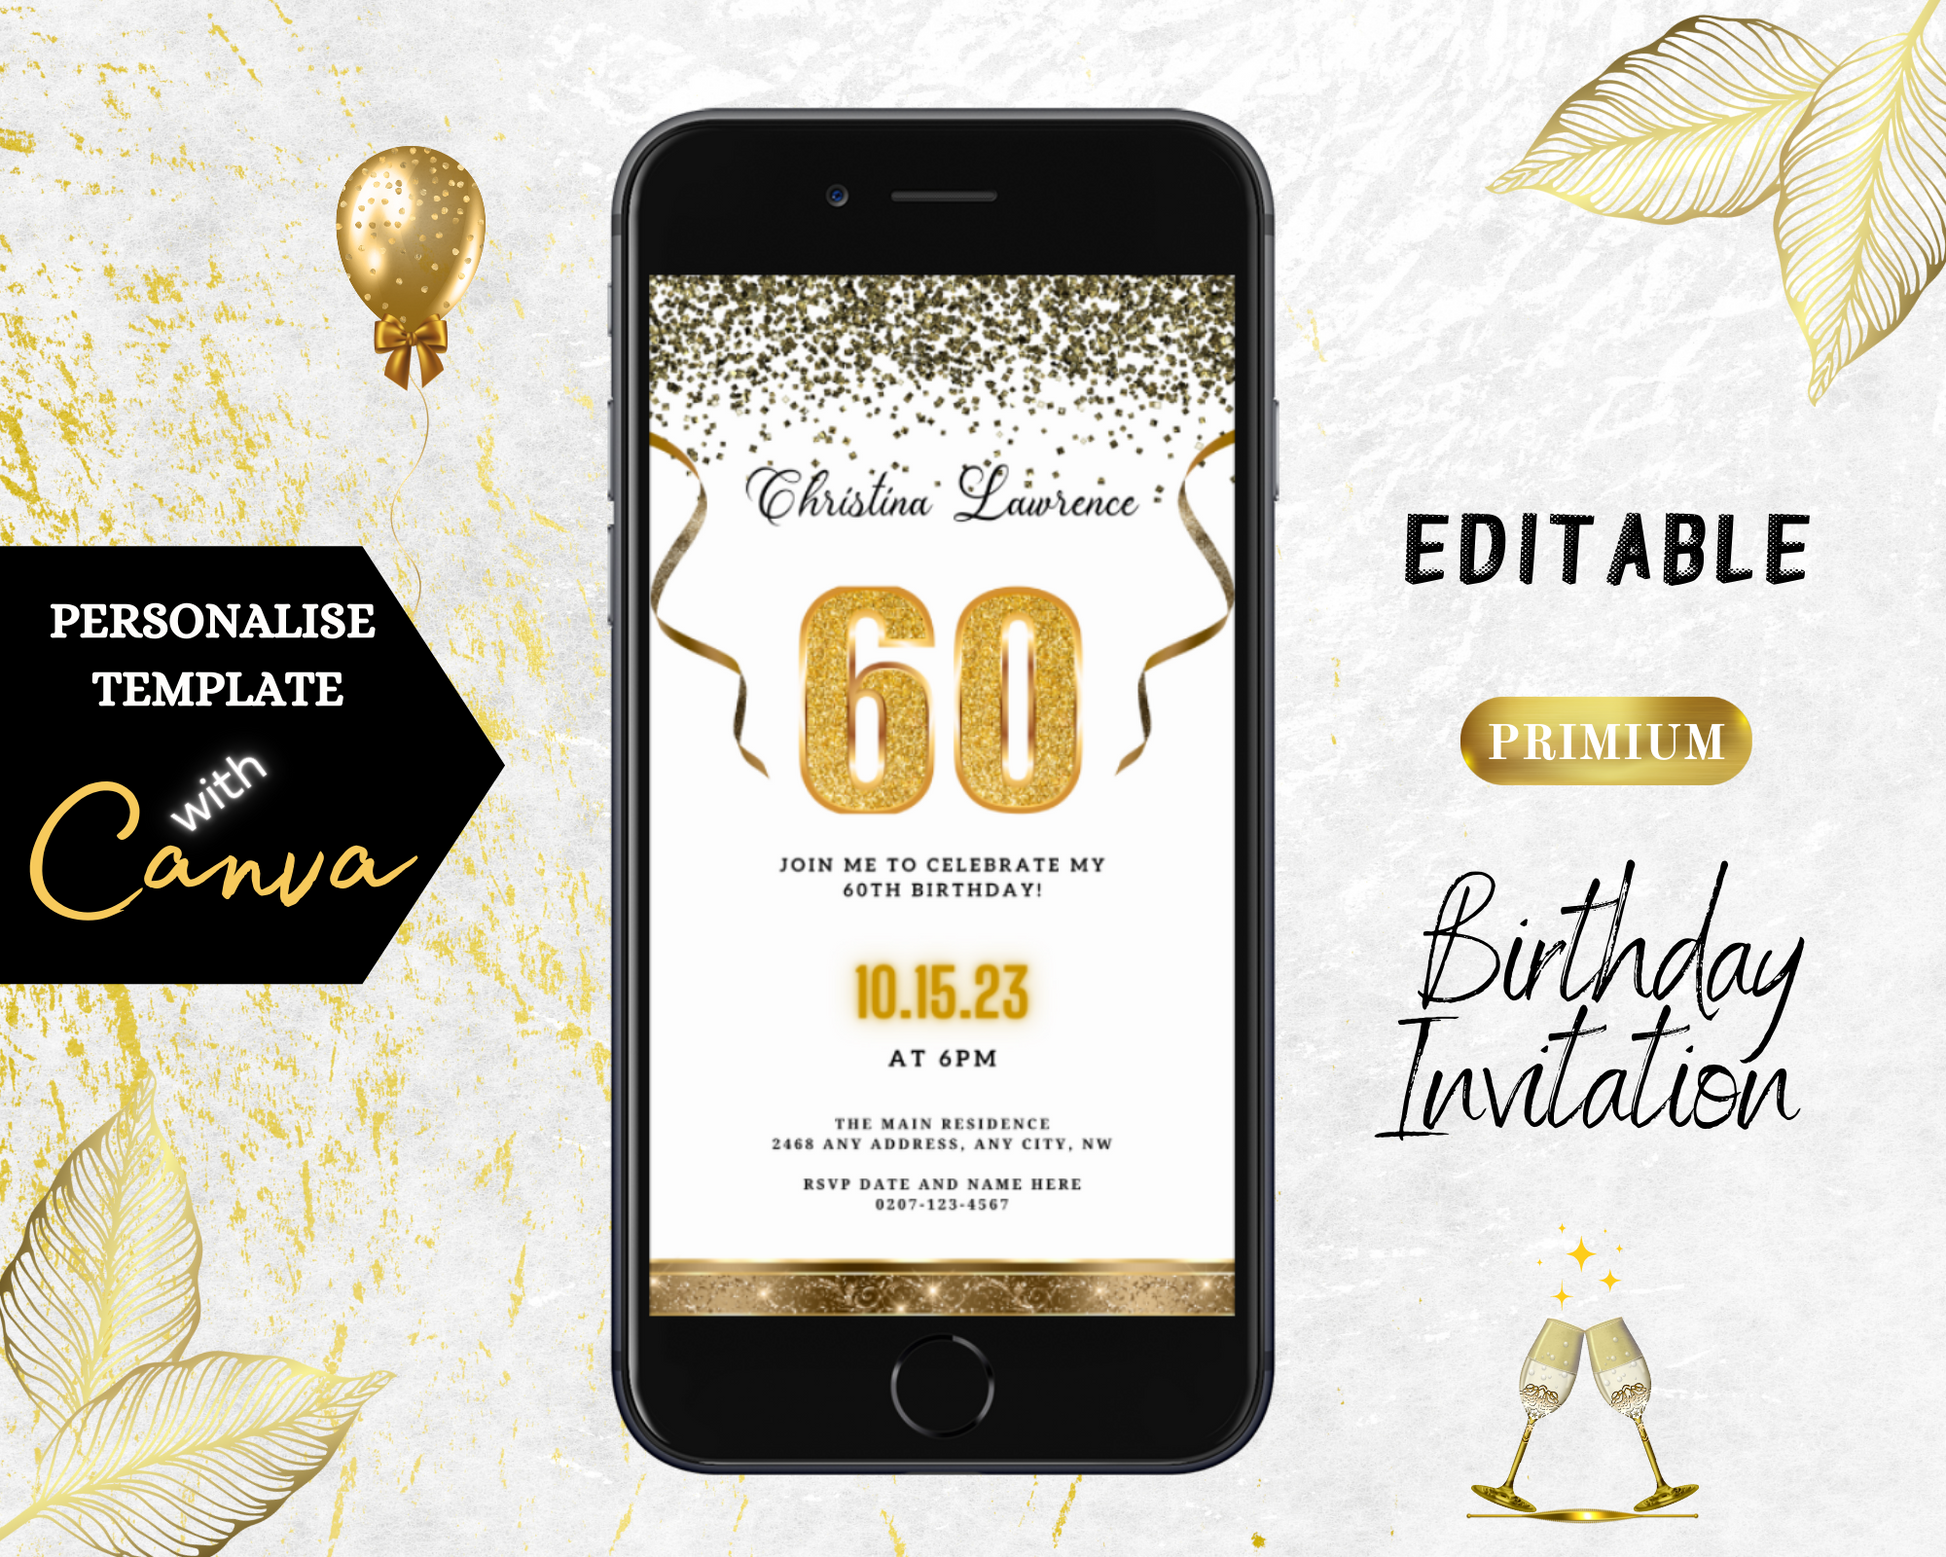 Customizable White Gold Confetti | 60th Birthday Evite displayed on a smartphone, showcasing elegant gold text and celebratory elements for a digital invitation.